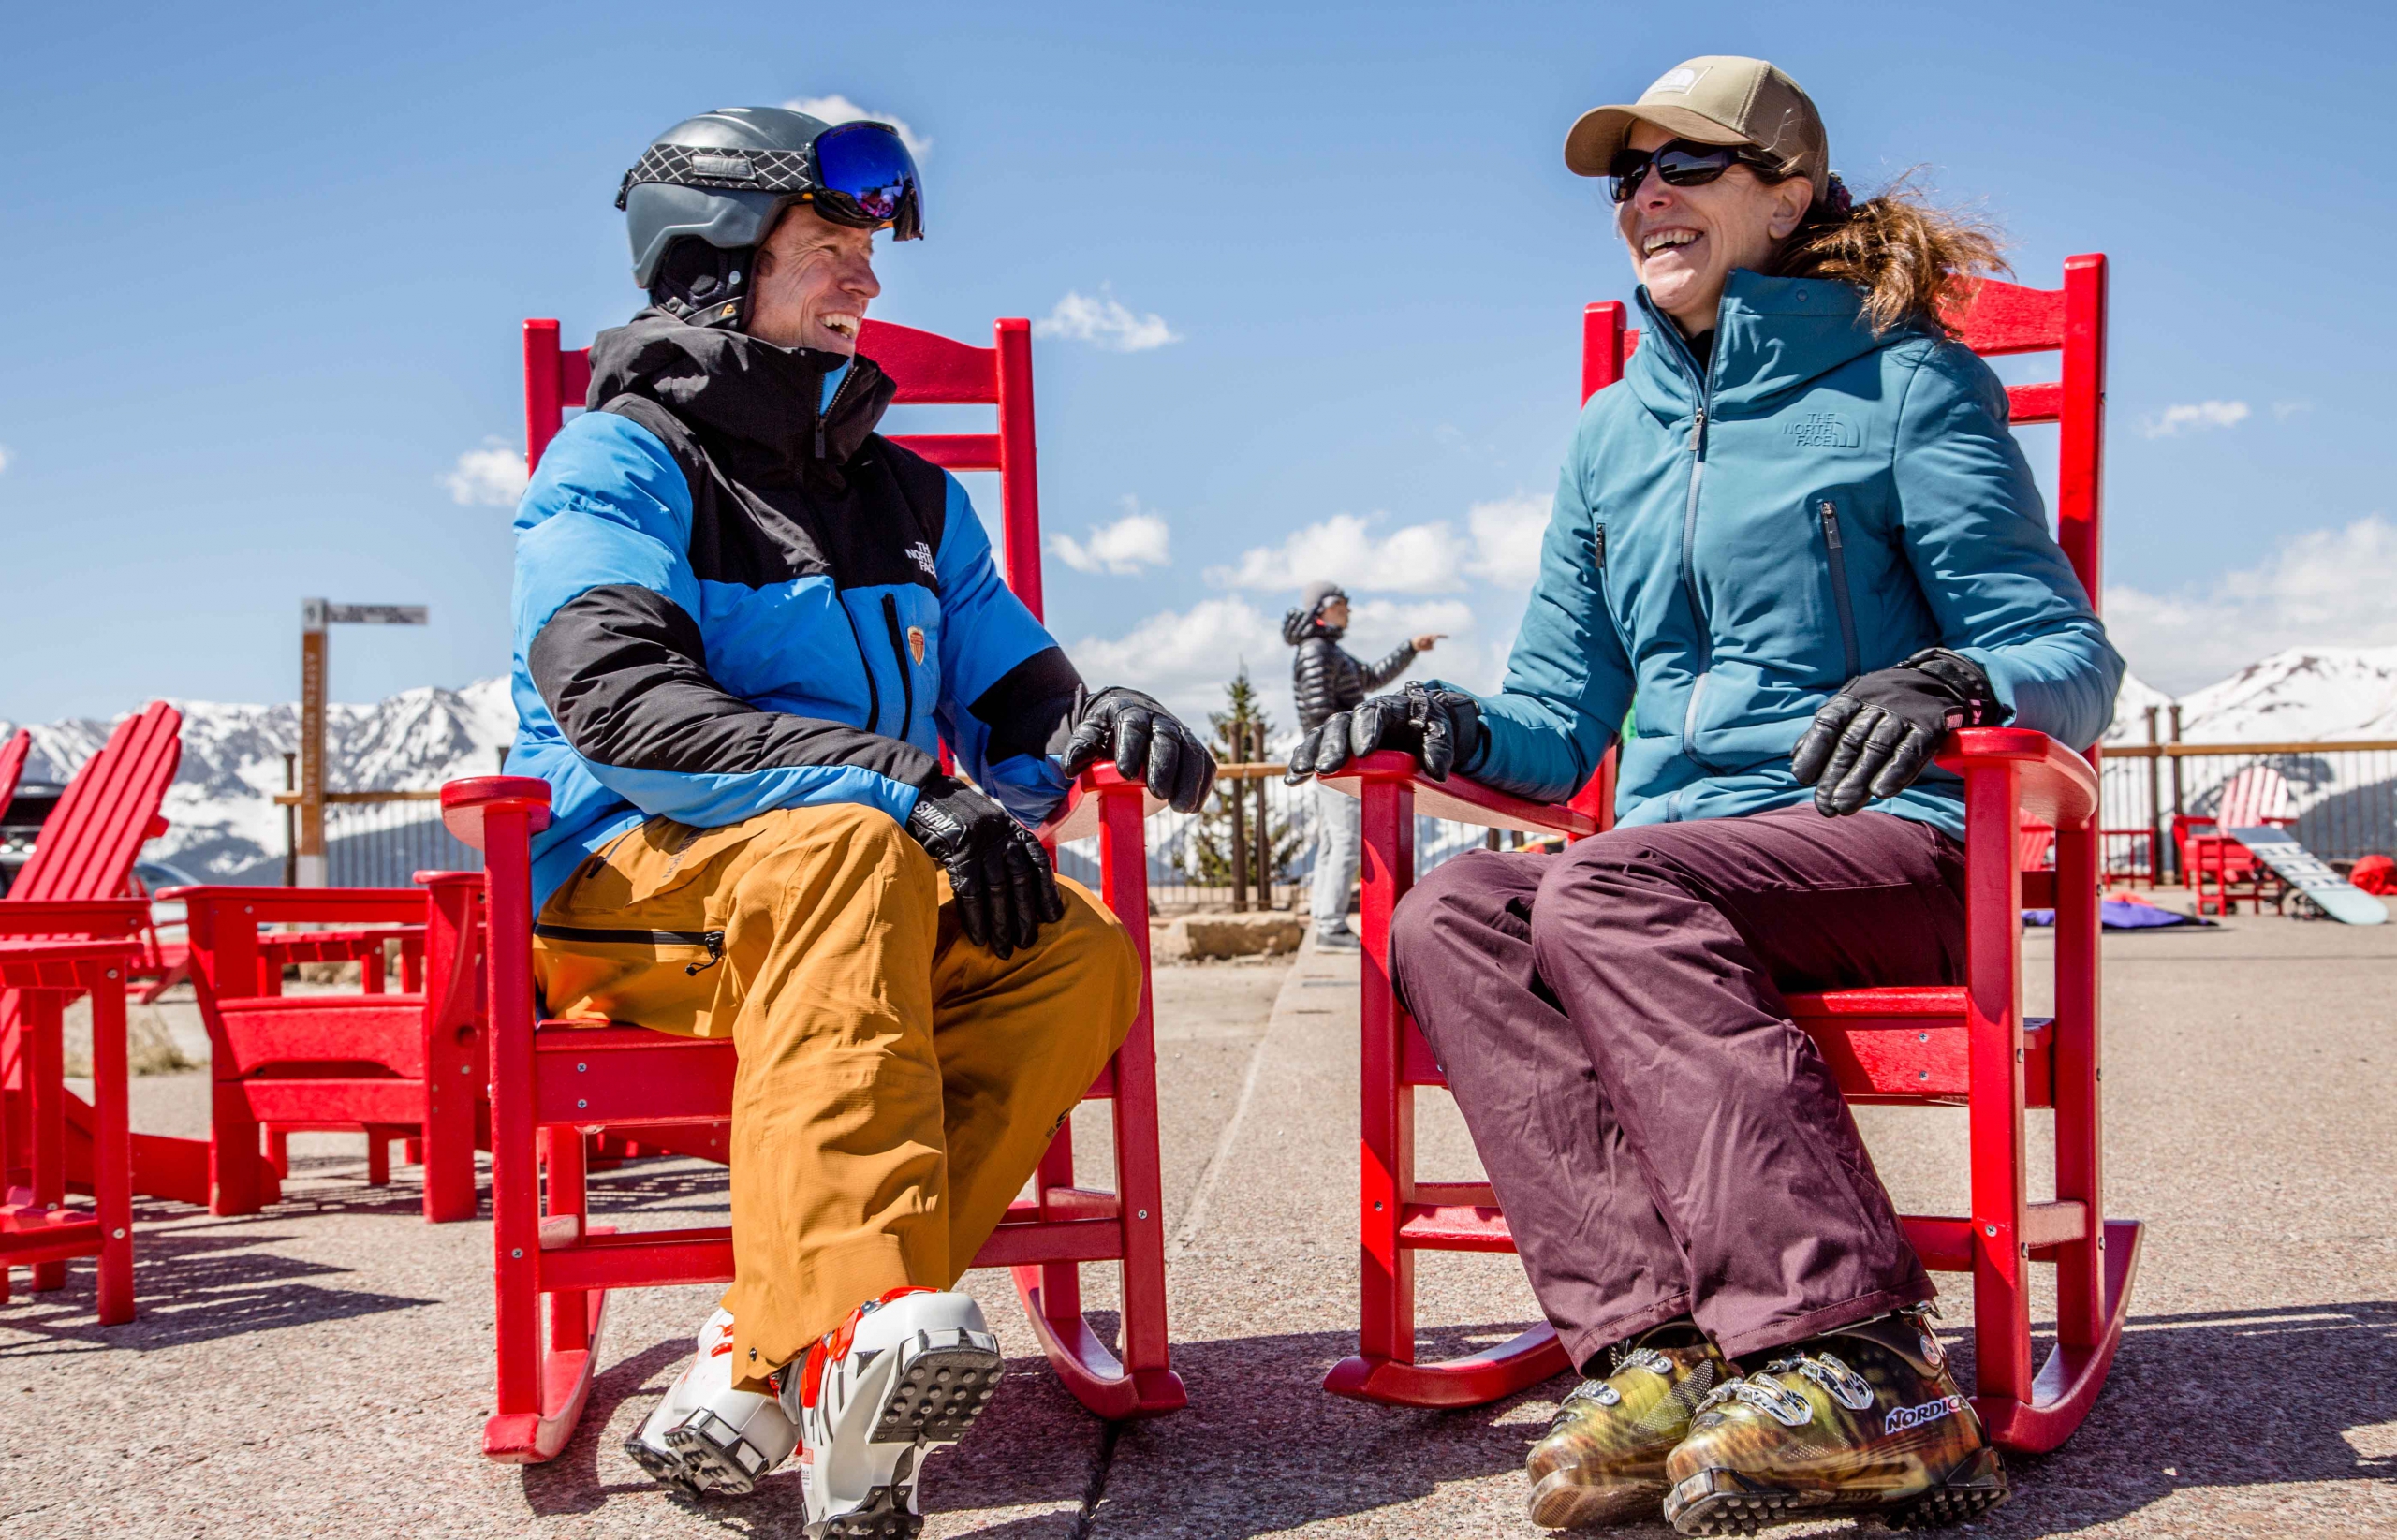 PSIA-AASI ski instructors talk while sitting in red chairs.